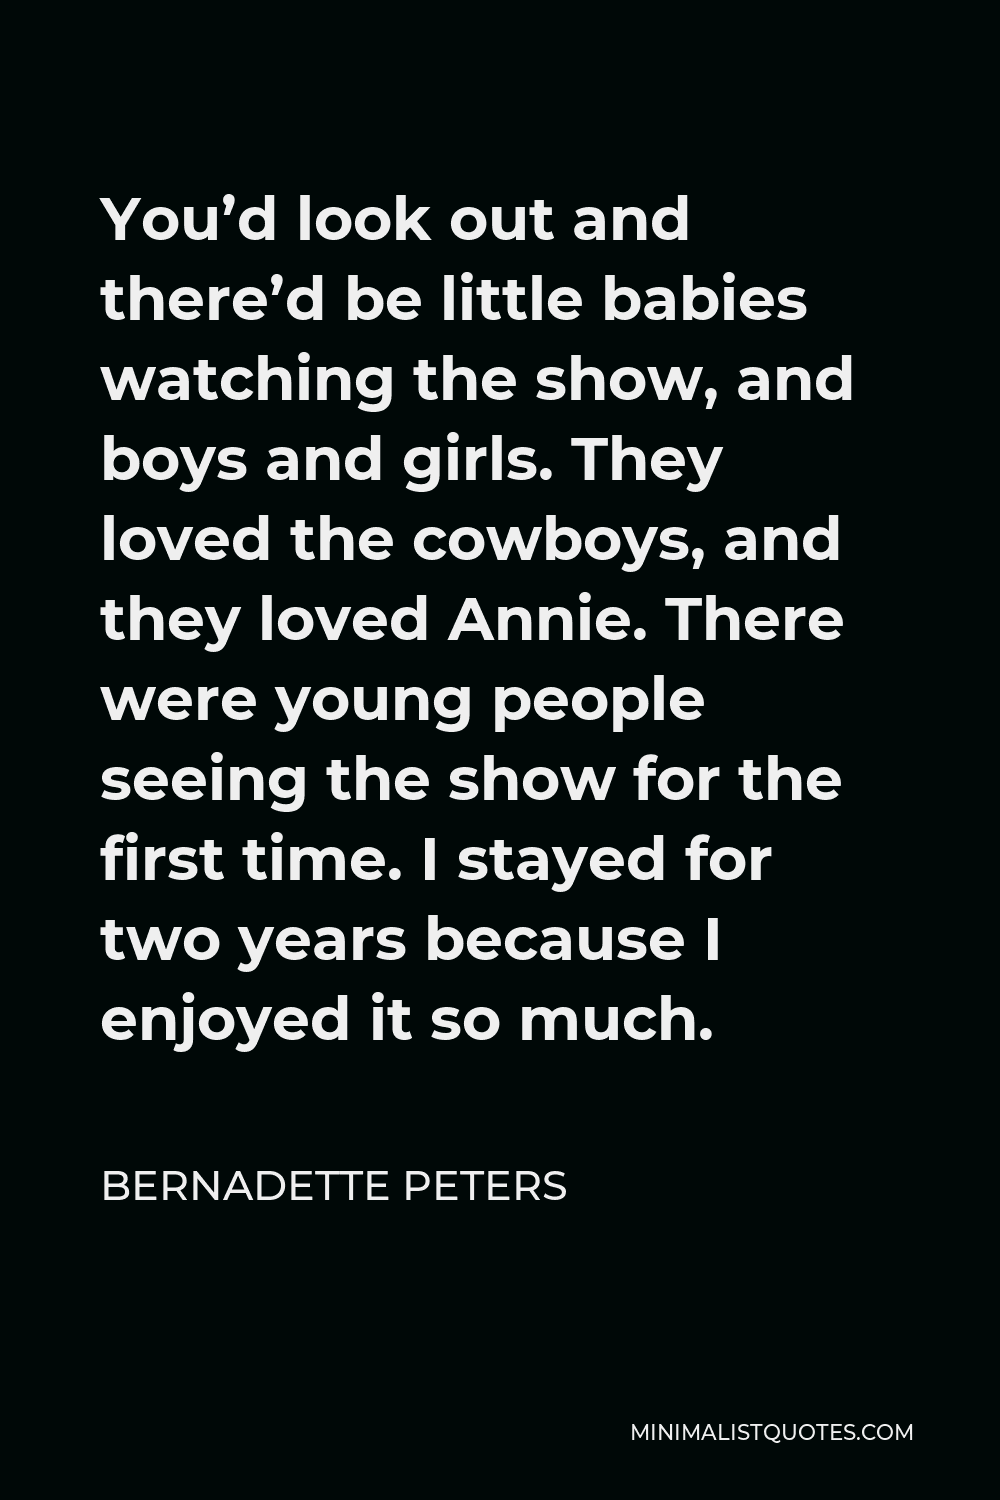 Bernadette Peters Quote - You’d look out and there’d be little babies watching the show, and boys and girls. They loved the cowboys, and they loved Annie. There were young people seeing the show for the first time. I stayed for two years because I enjoyed it so much.